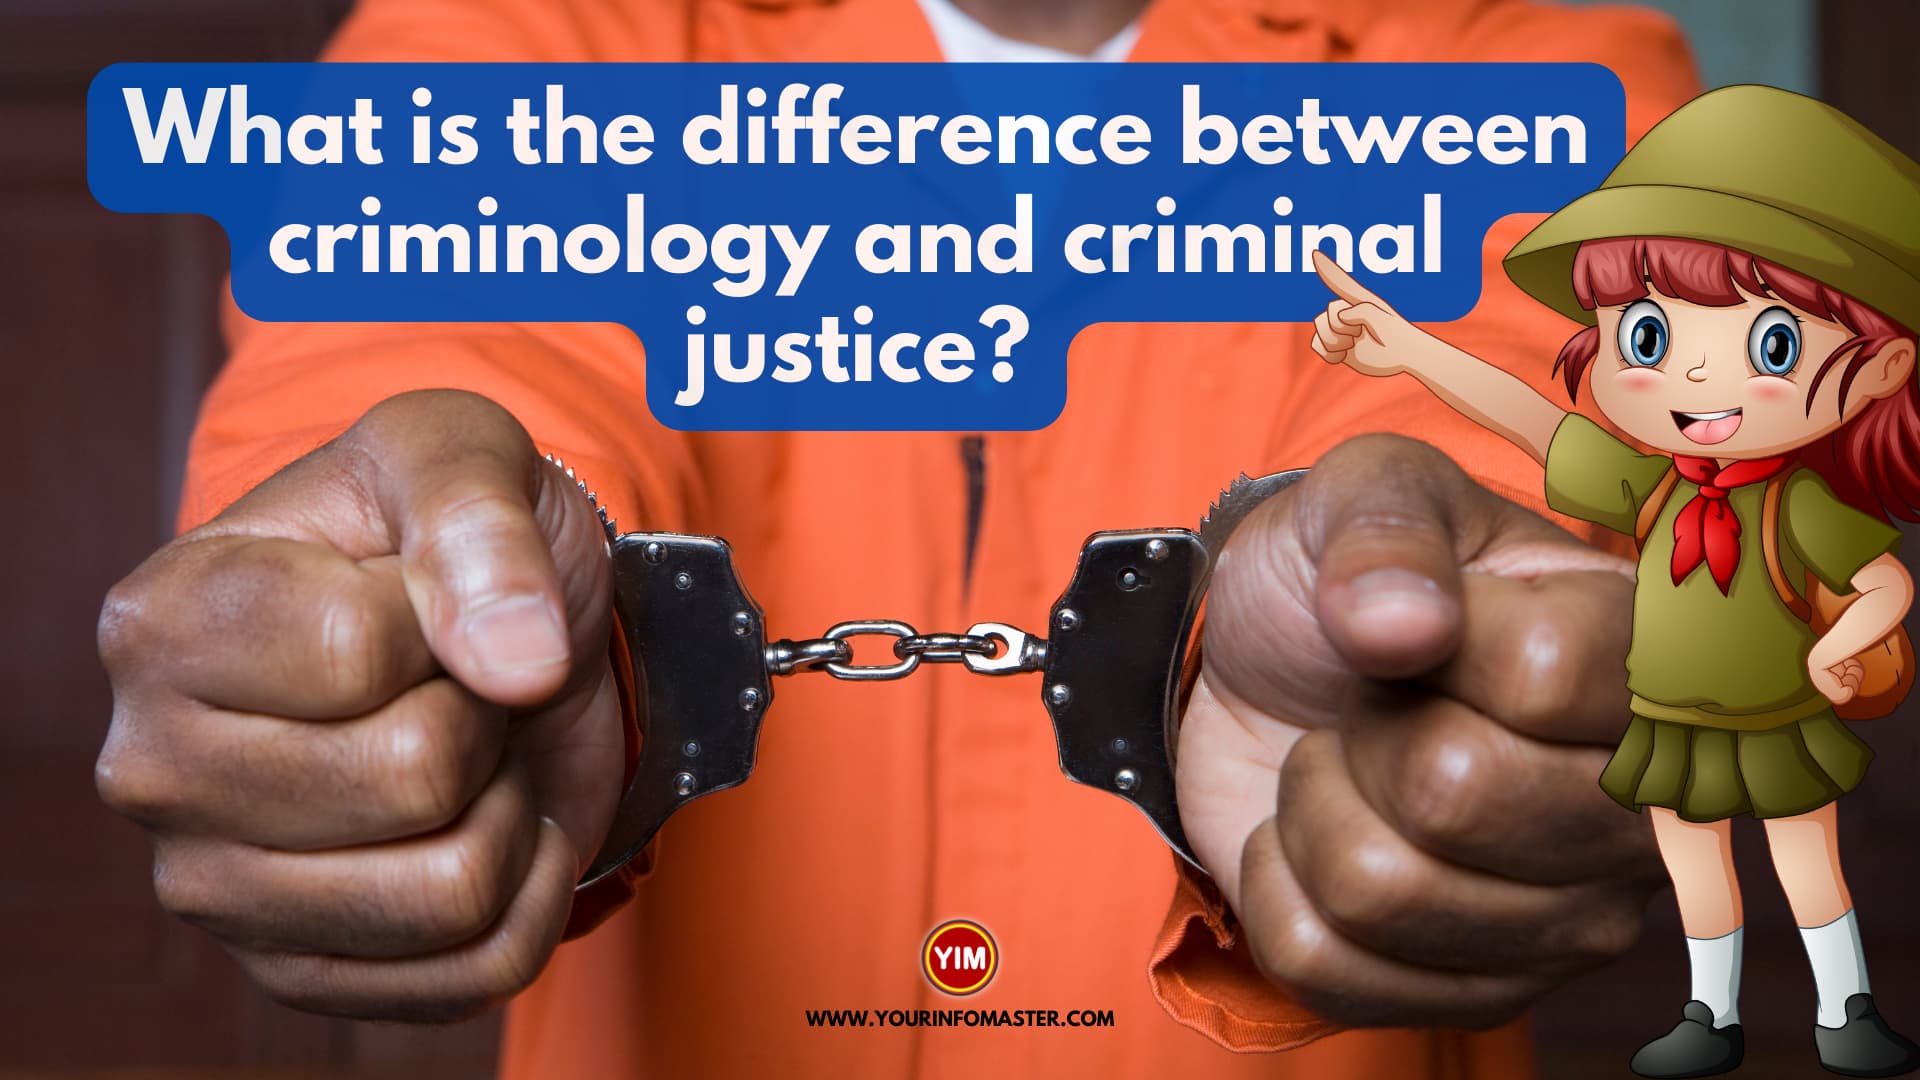 What is the difference between criminology and criminal justice